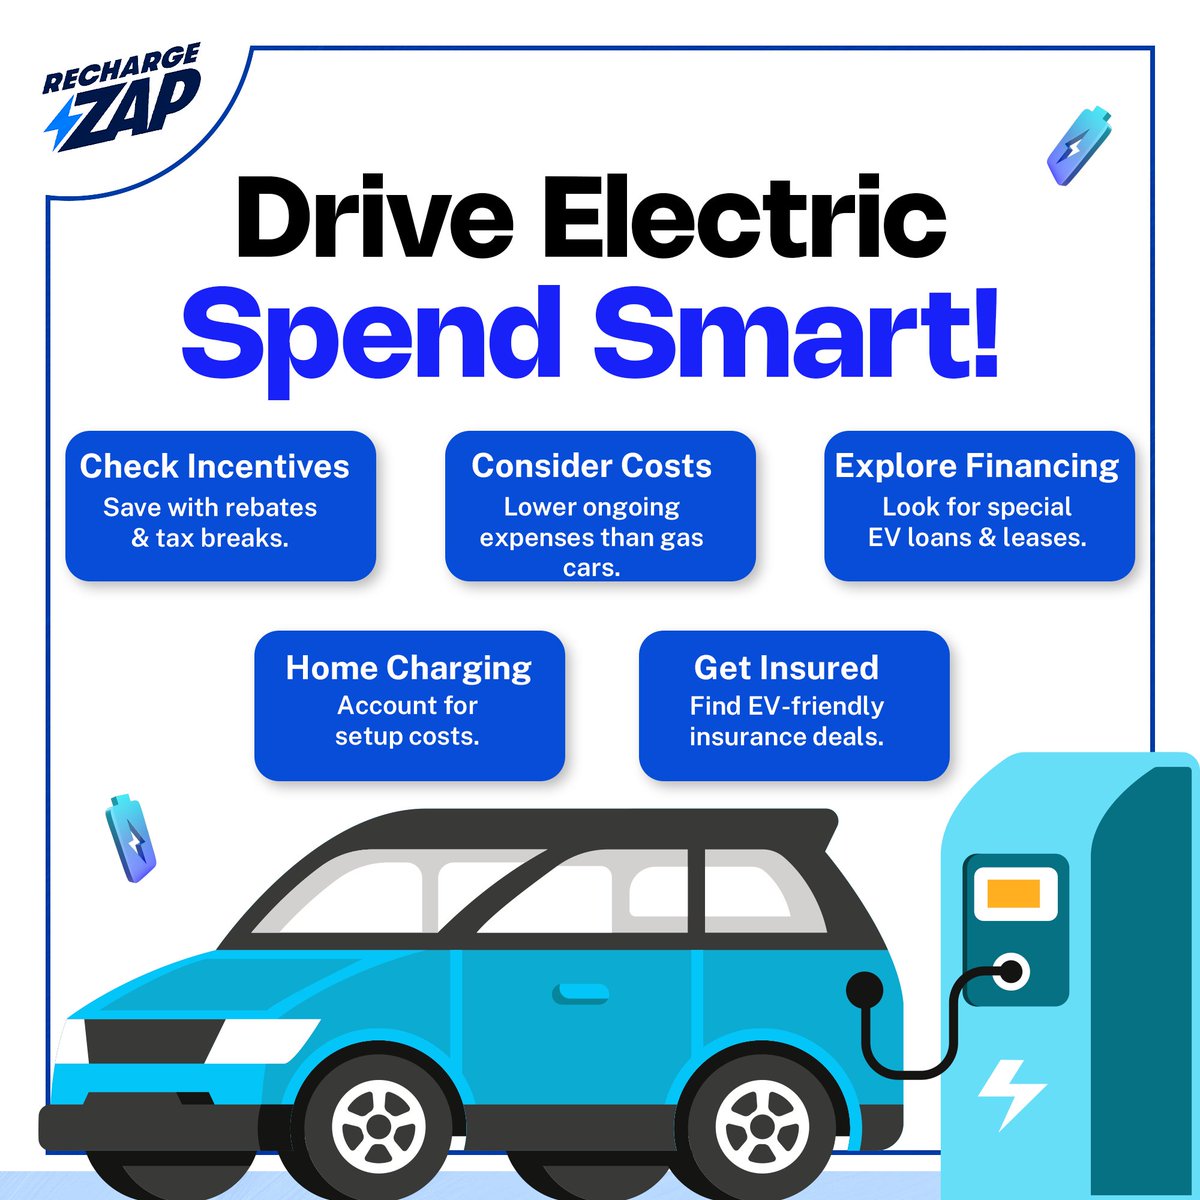 Ready to go electric? Plan smart with EV-specific incentives, lower running costs, and the right financing. Drive green without breaking the bank! #ElectricVehicles #SmartFinance #rechargezap